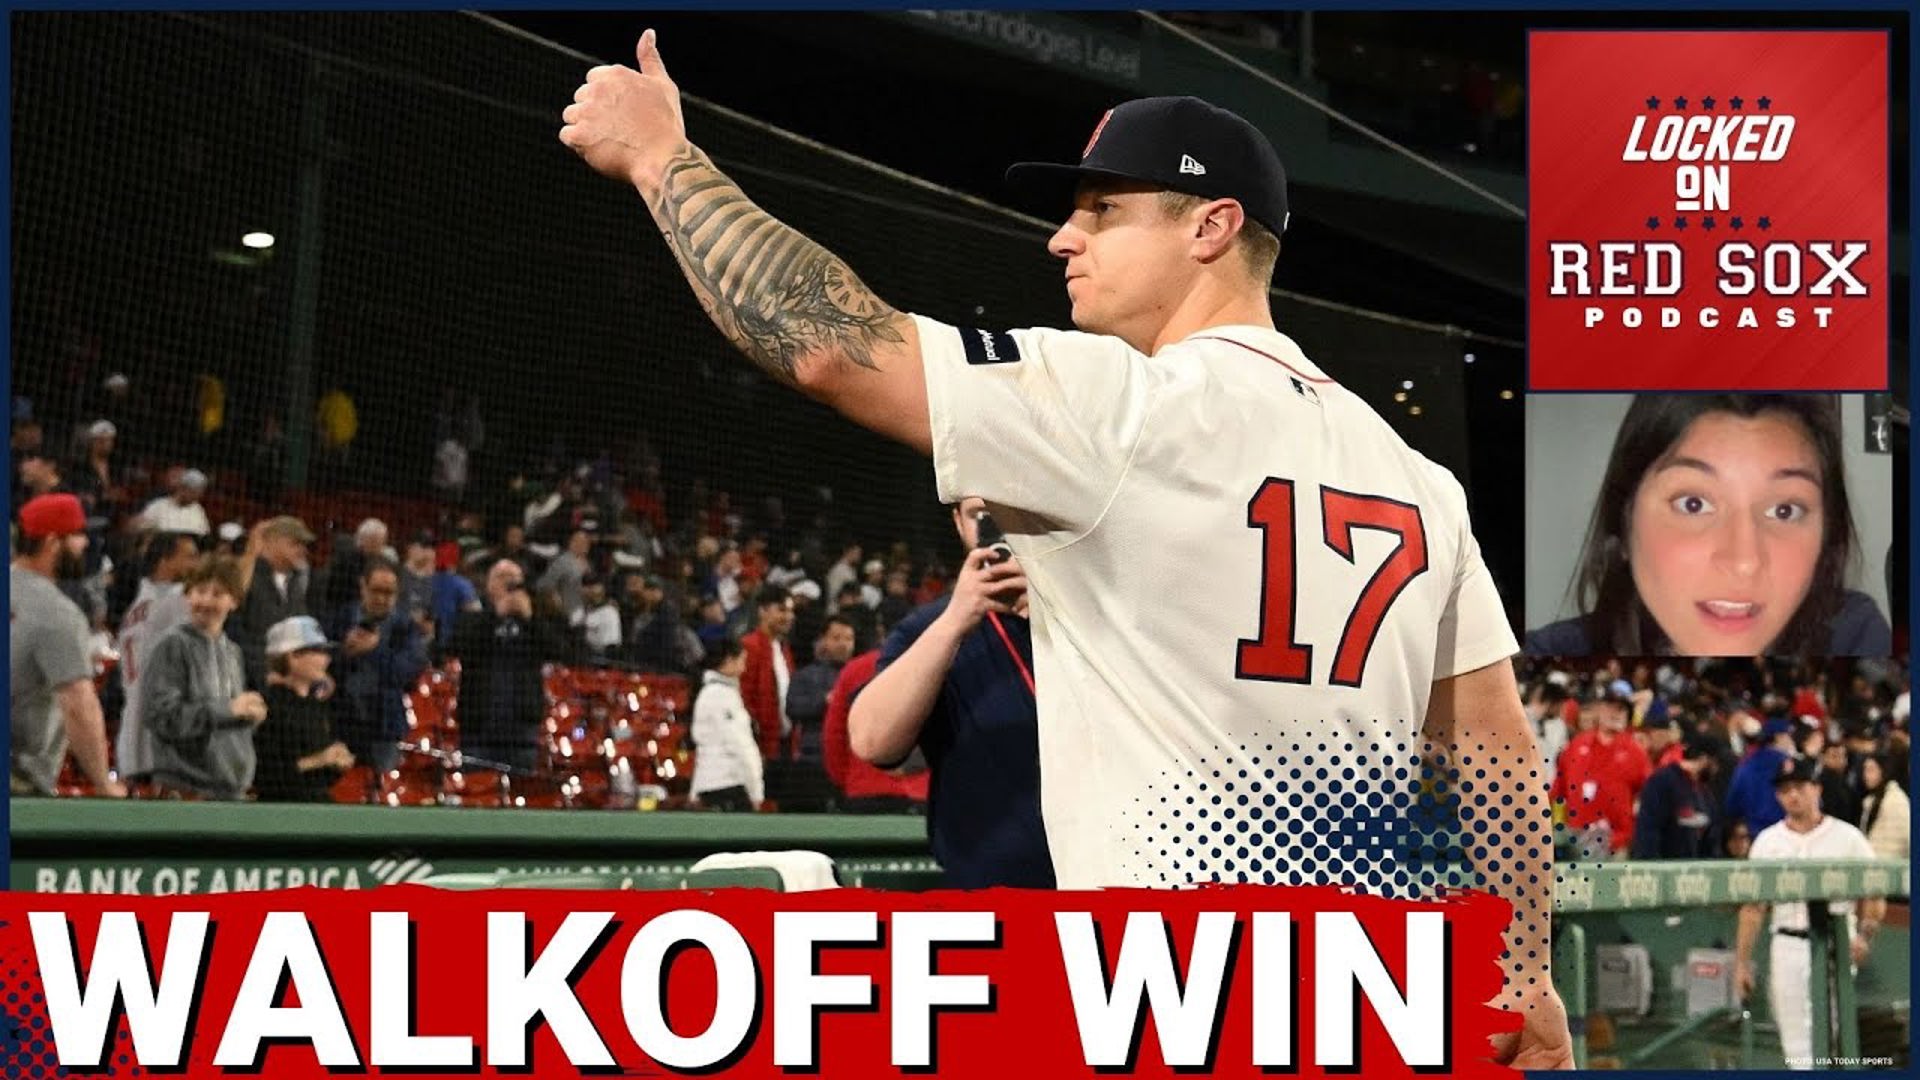 The Red Sox had a crazy series at home against the Chicago Cubs in which they won 17-0 on Saturday and won on a walkoff bloop hit by Tyler O'Neill on Sunday.